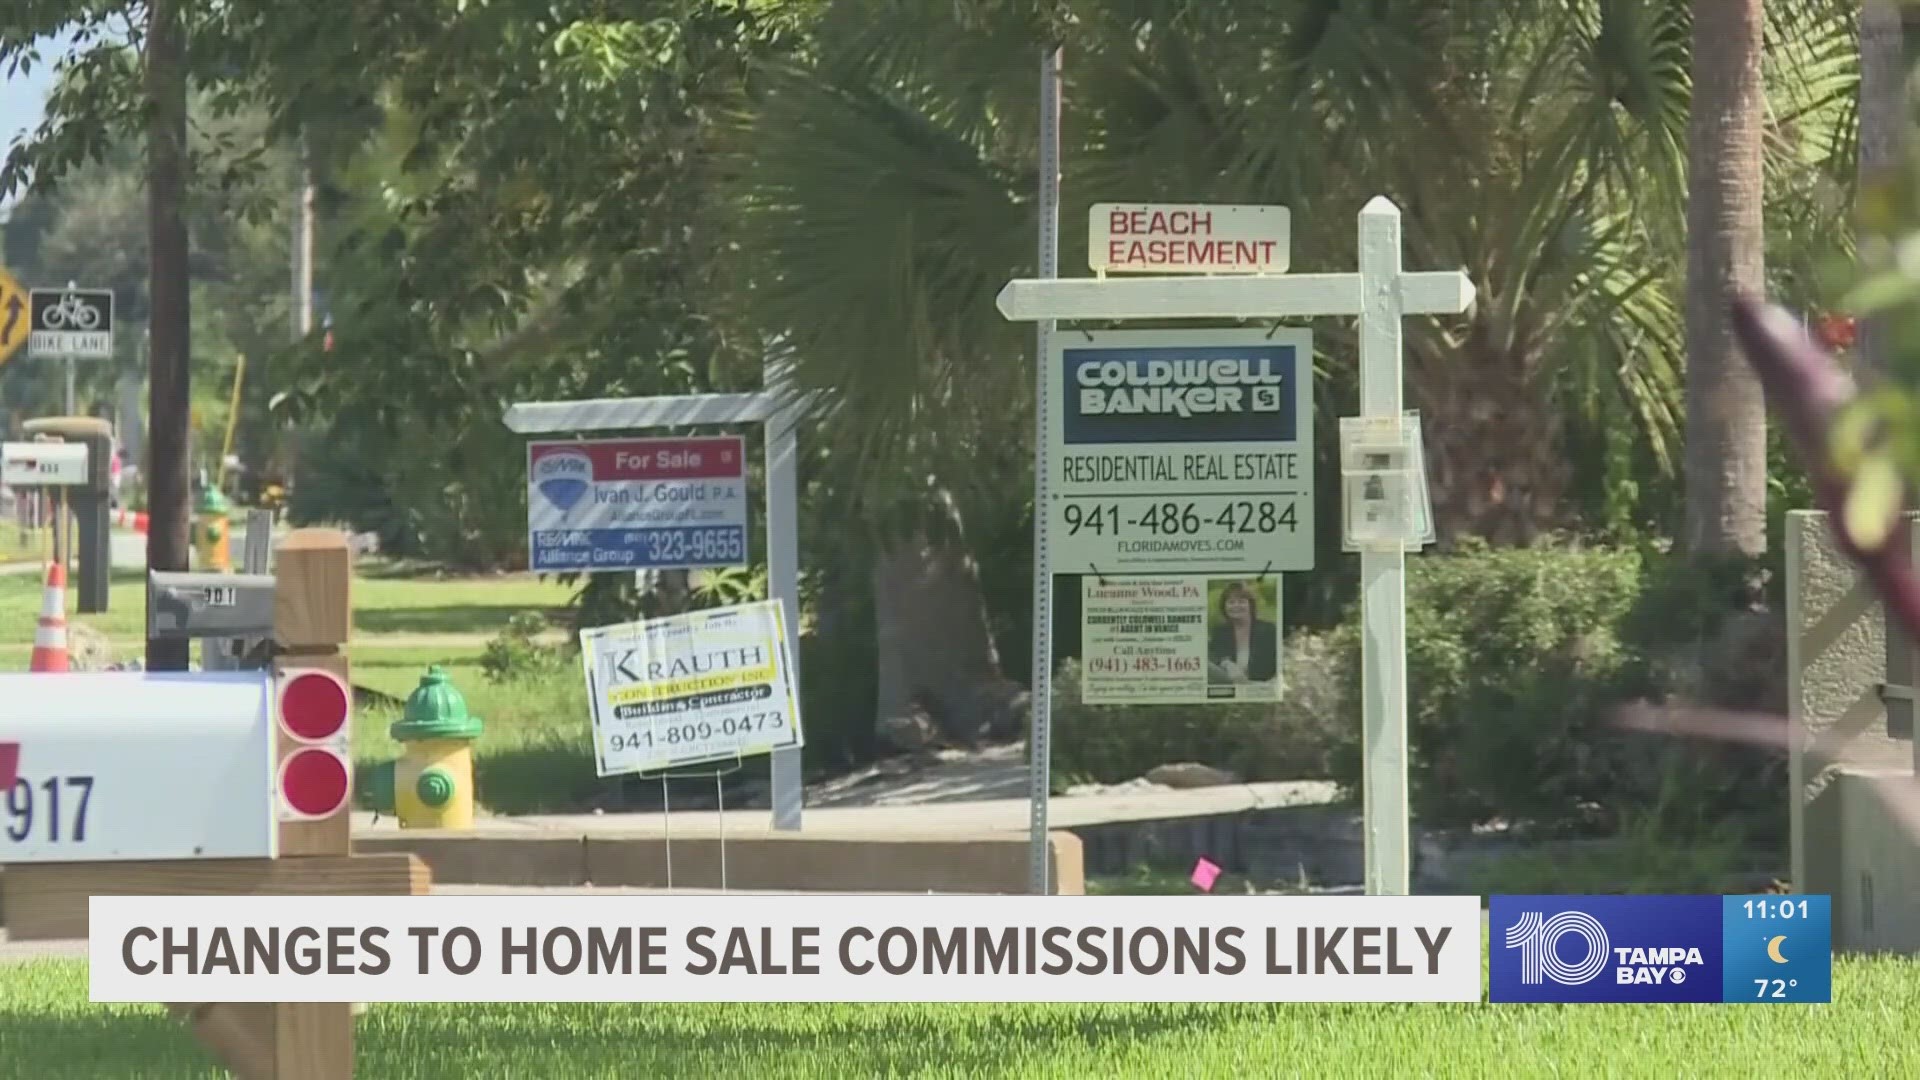 Here's how the changes could impact sales in Florida.